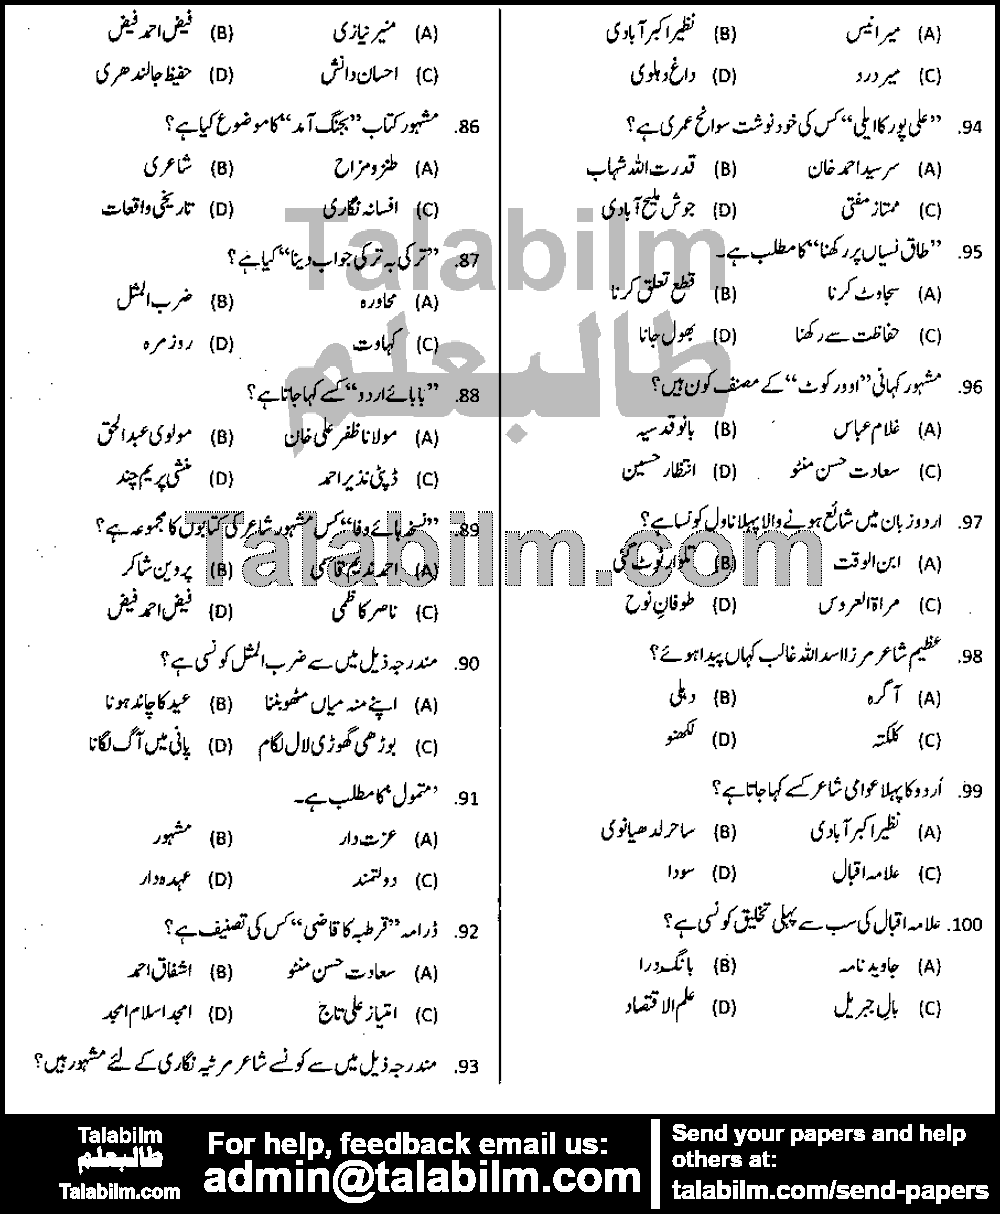 Auditor Punjab Finance Department 0 past paper for 2010 Page No. 4